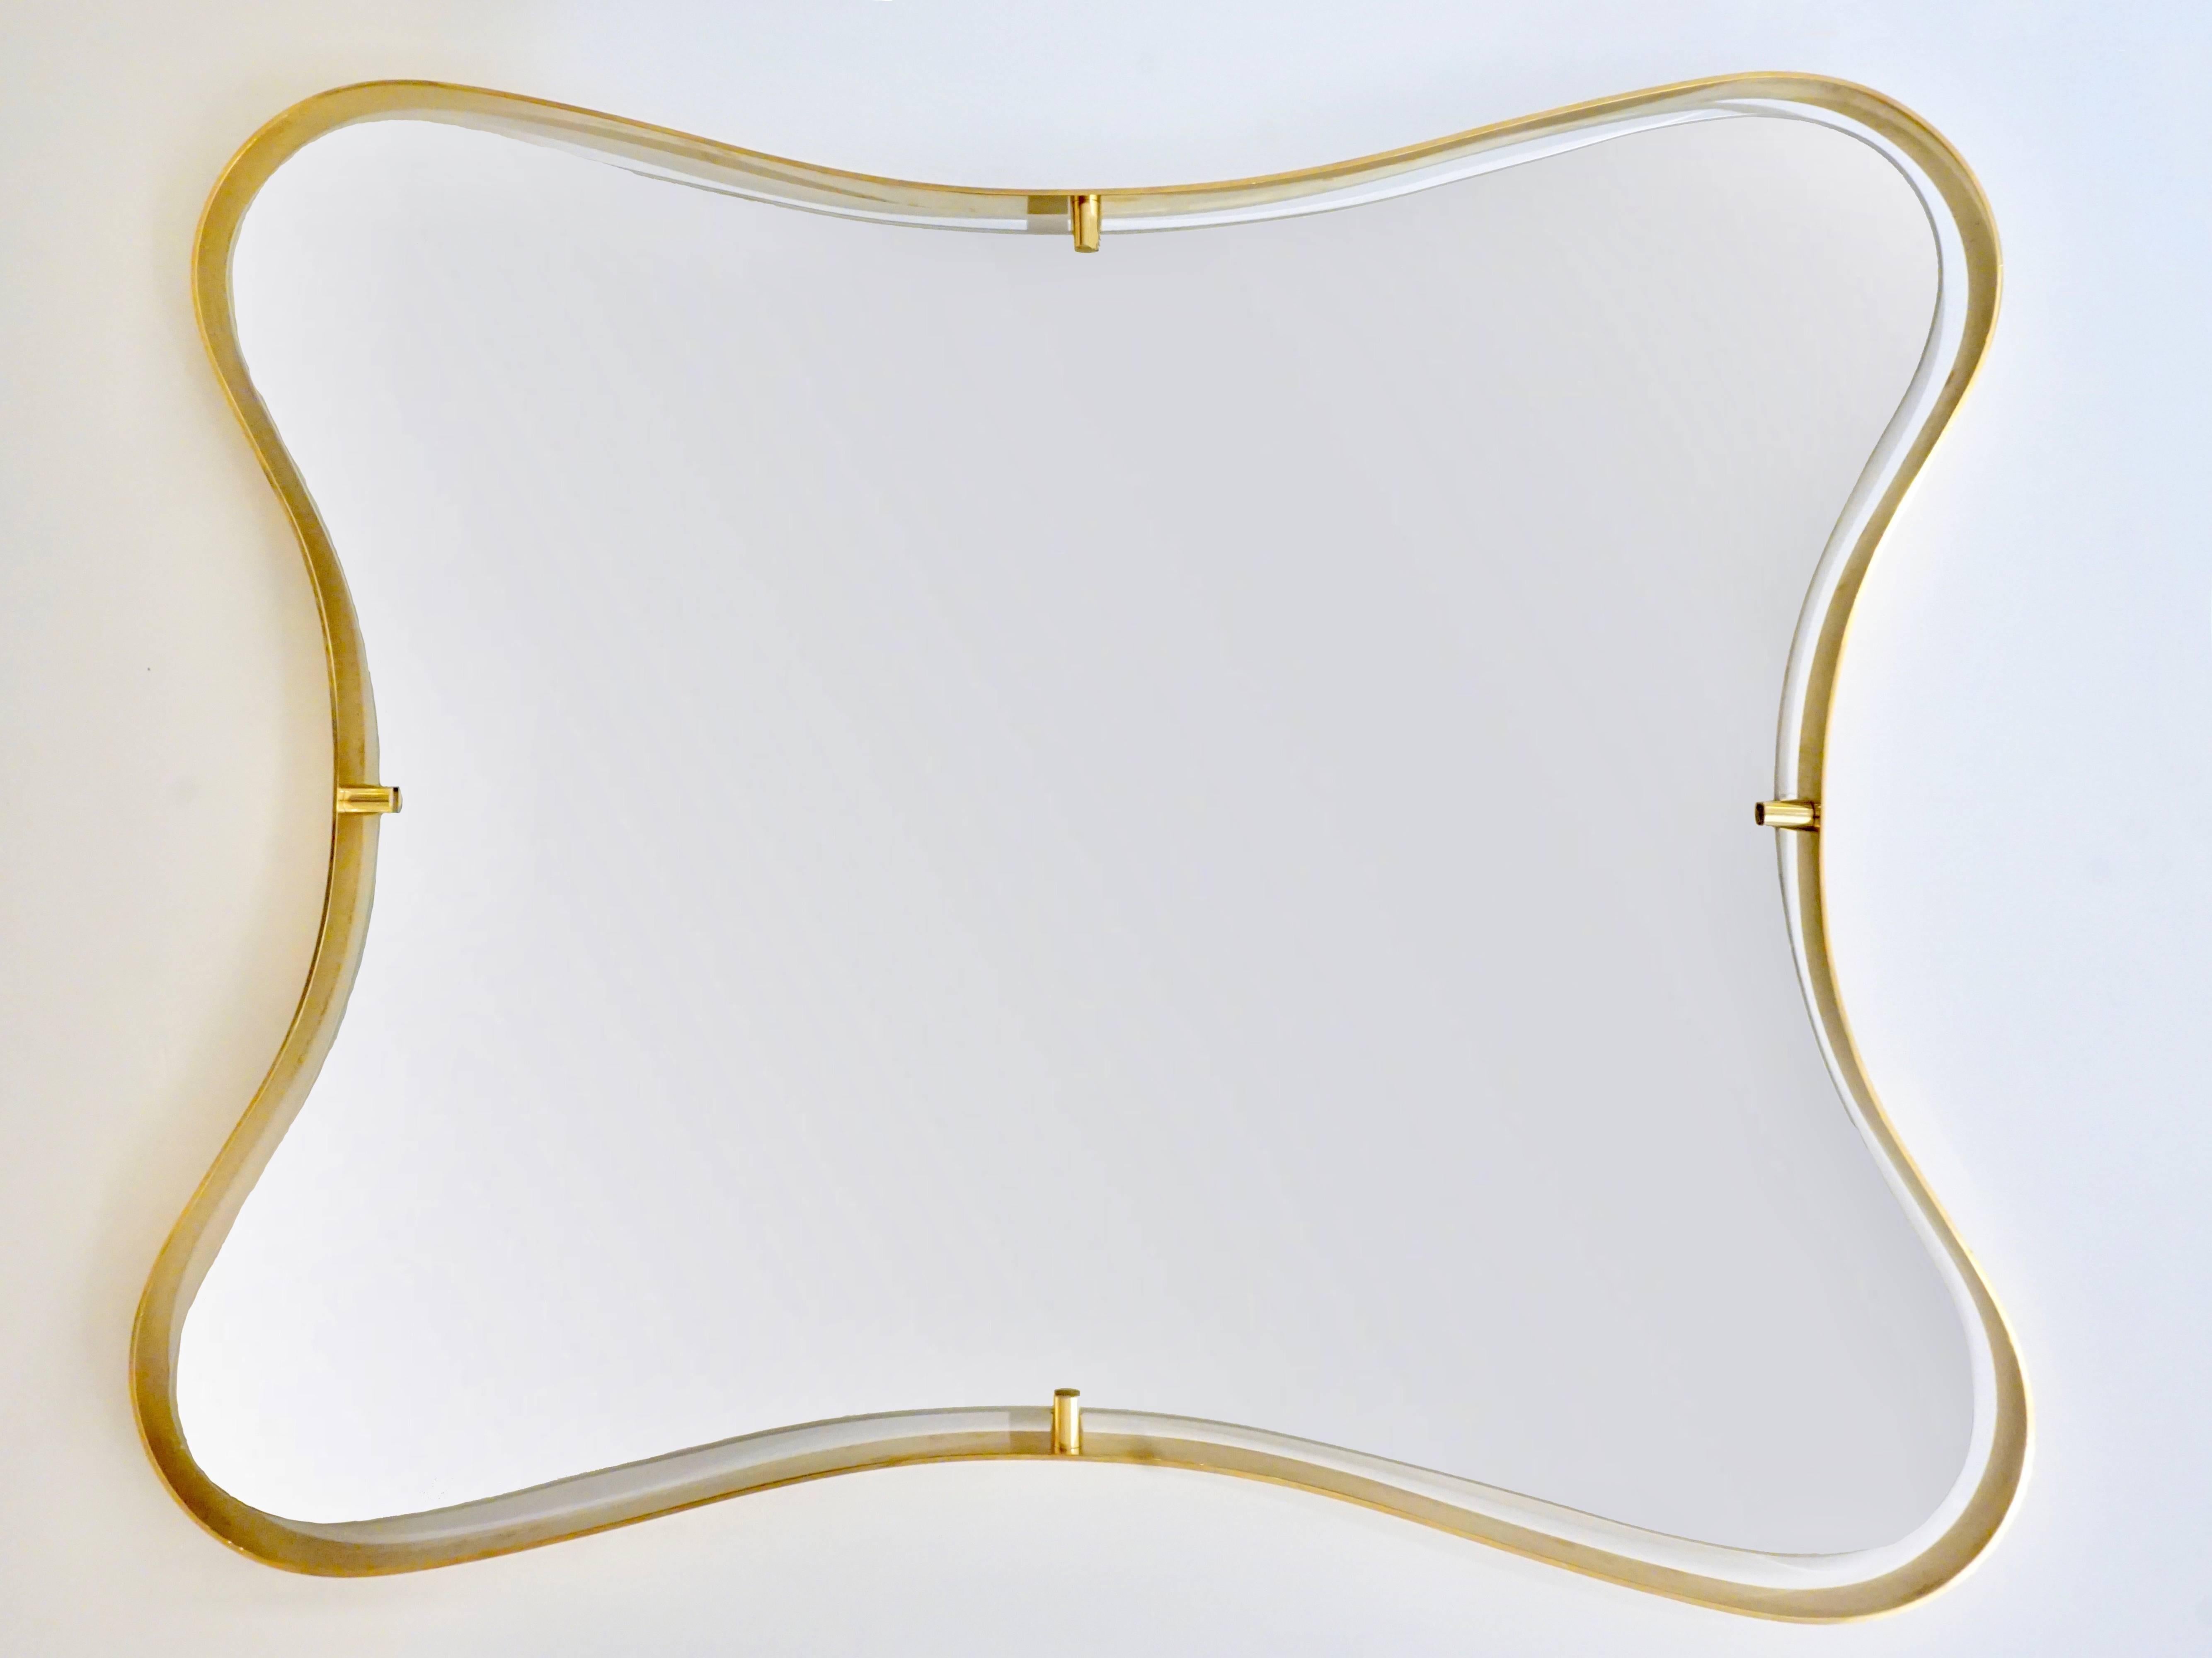 Contemporary Italian Minimalist Brass Mirror with Organic Curved Frame For Sale 1